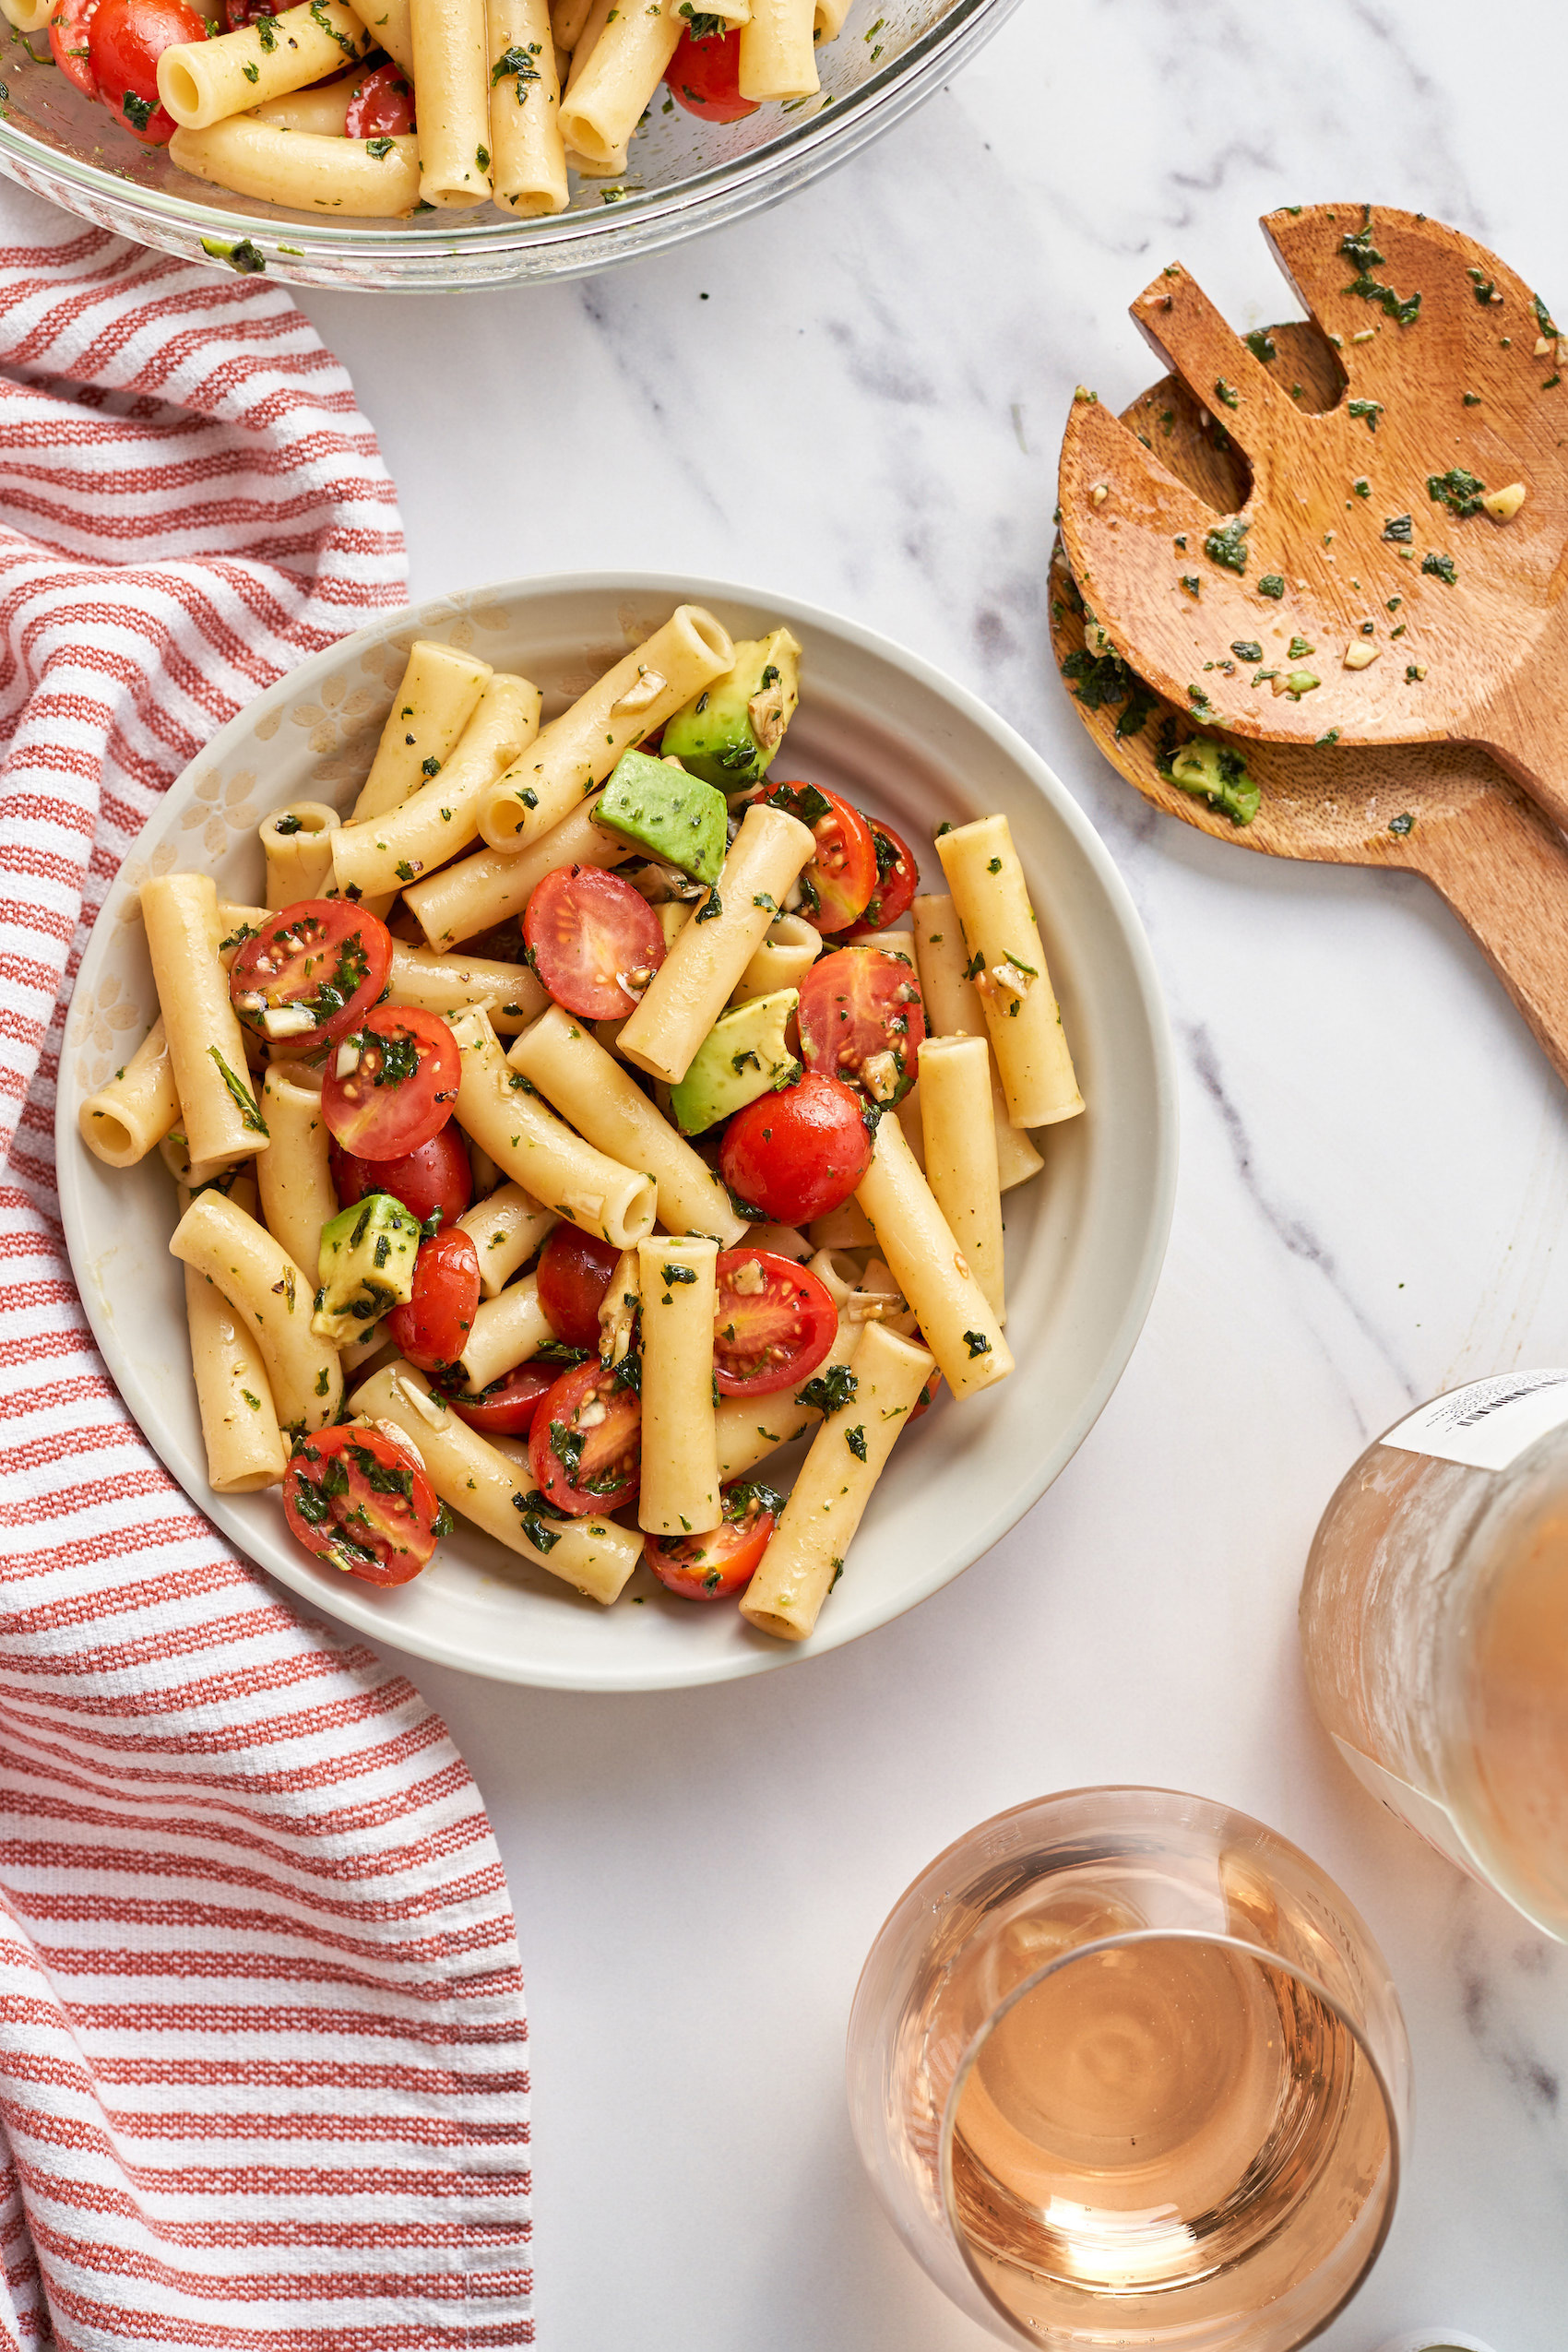 a bowl of pasta salad served with a glass of rose